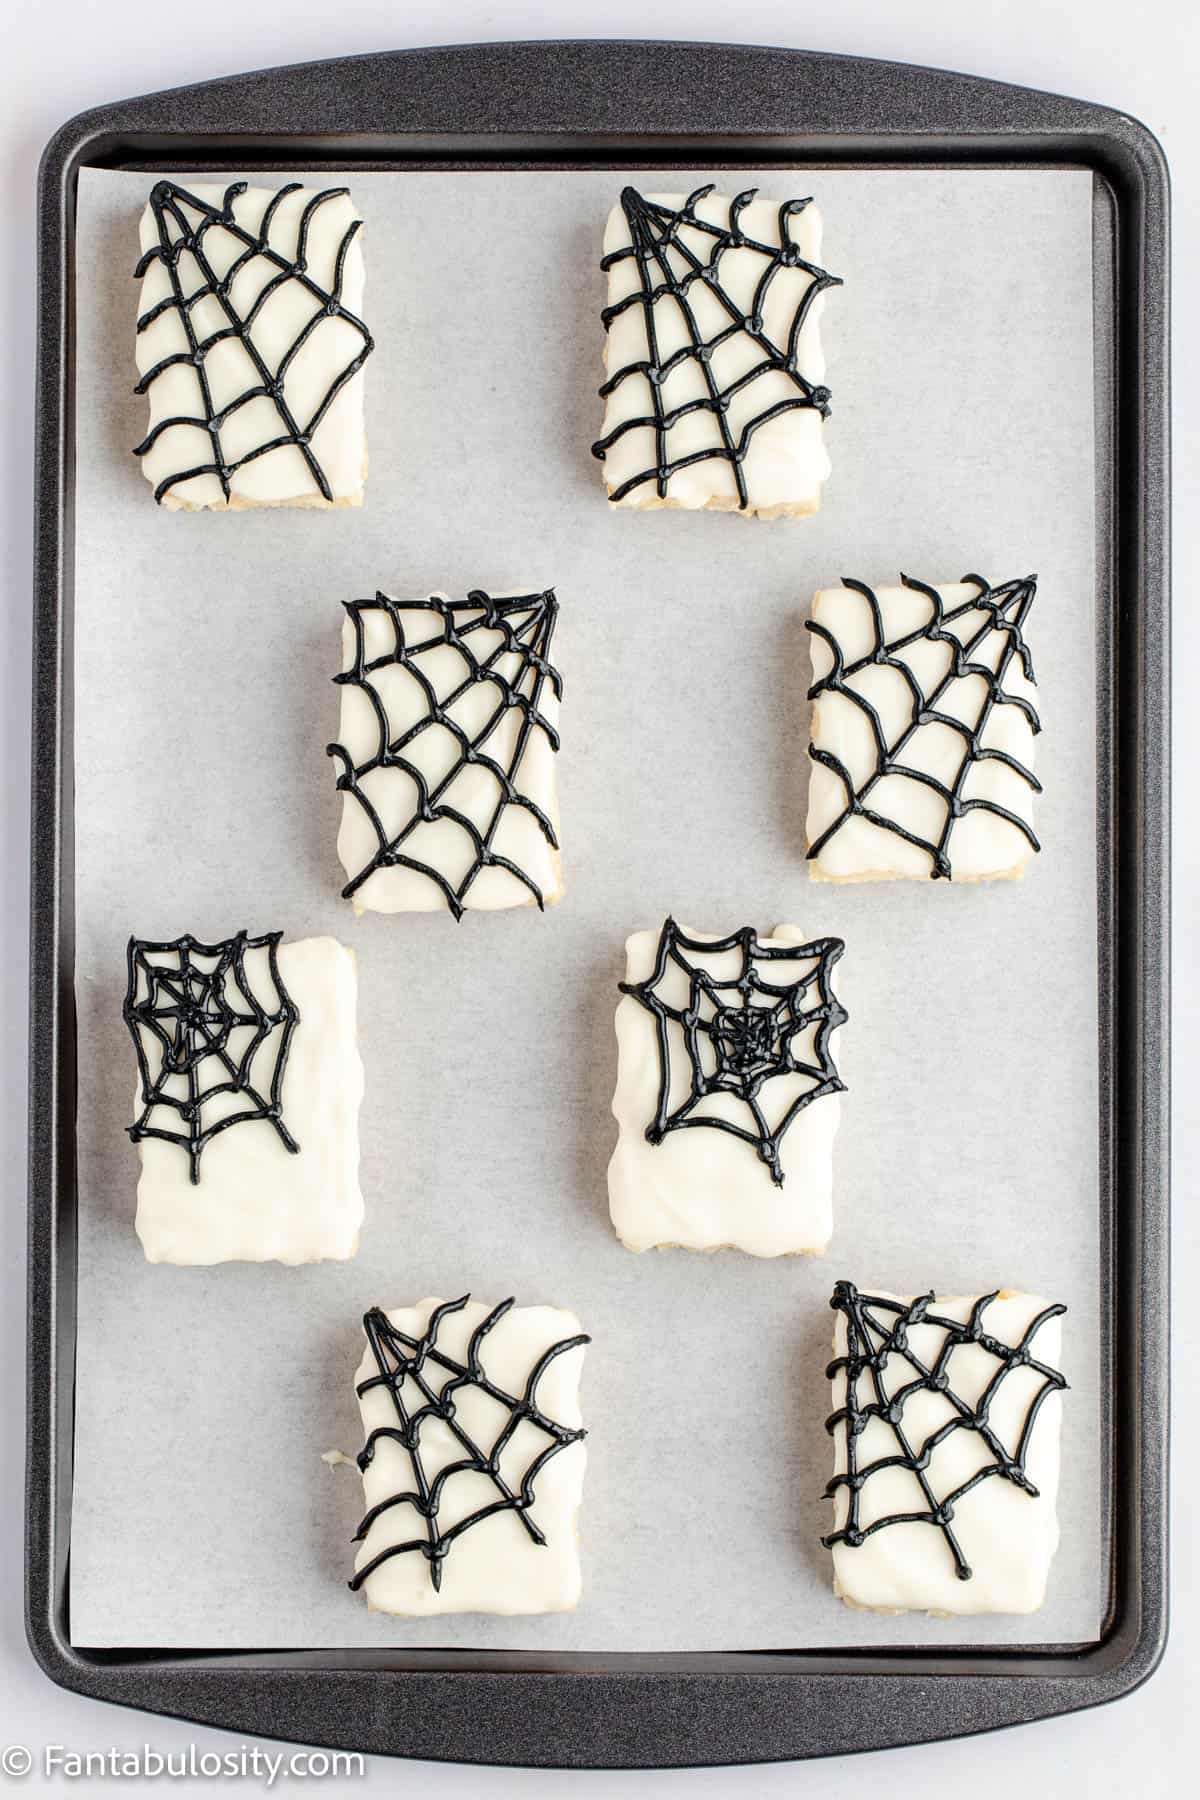 Chocolate covered Rice krispie treats are decorated with black piped spider webs and laid on a parchment lined baking sheet